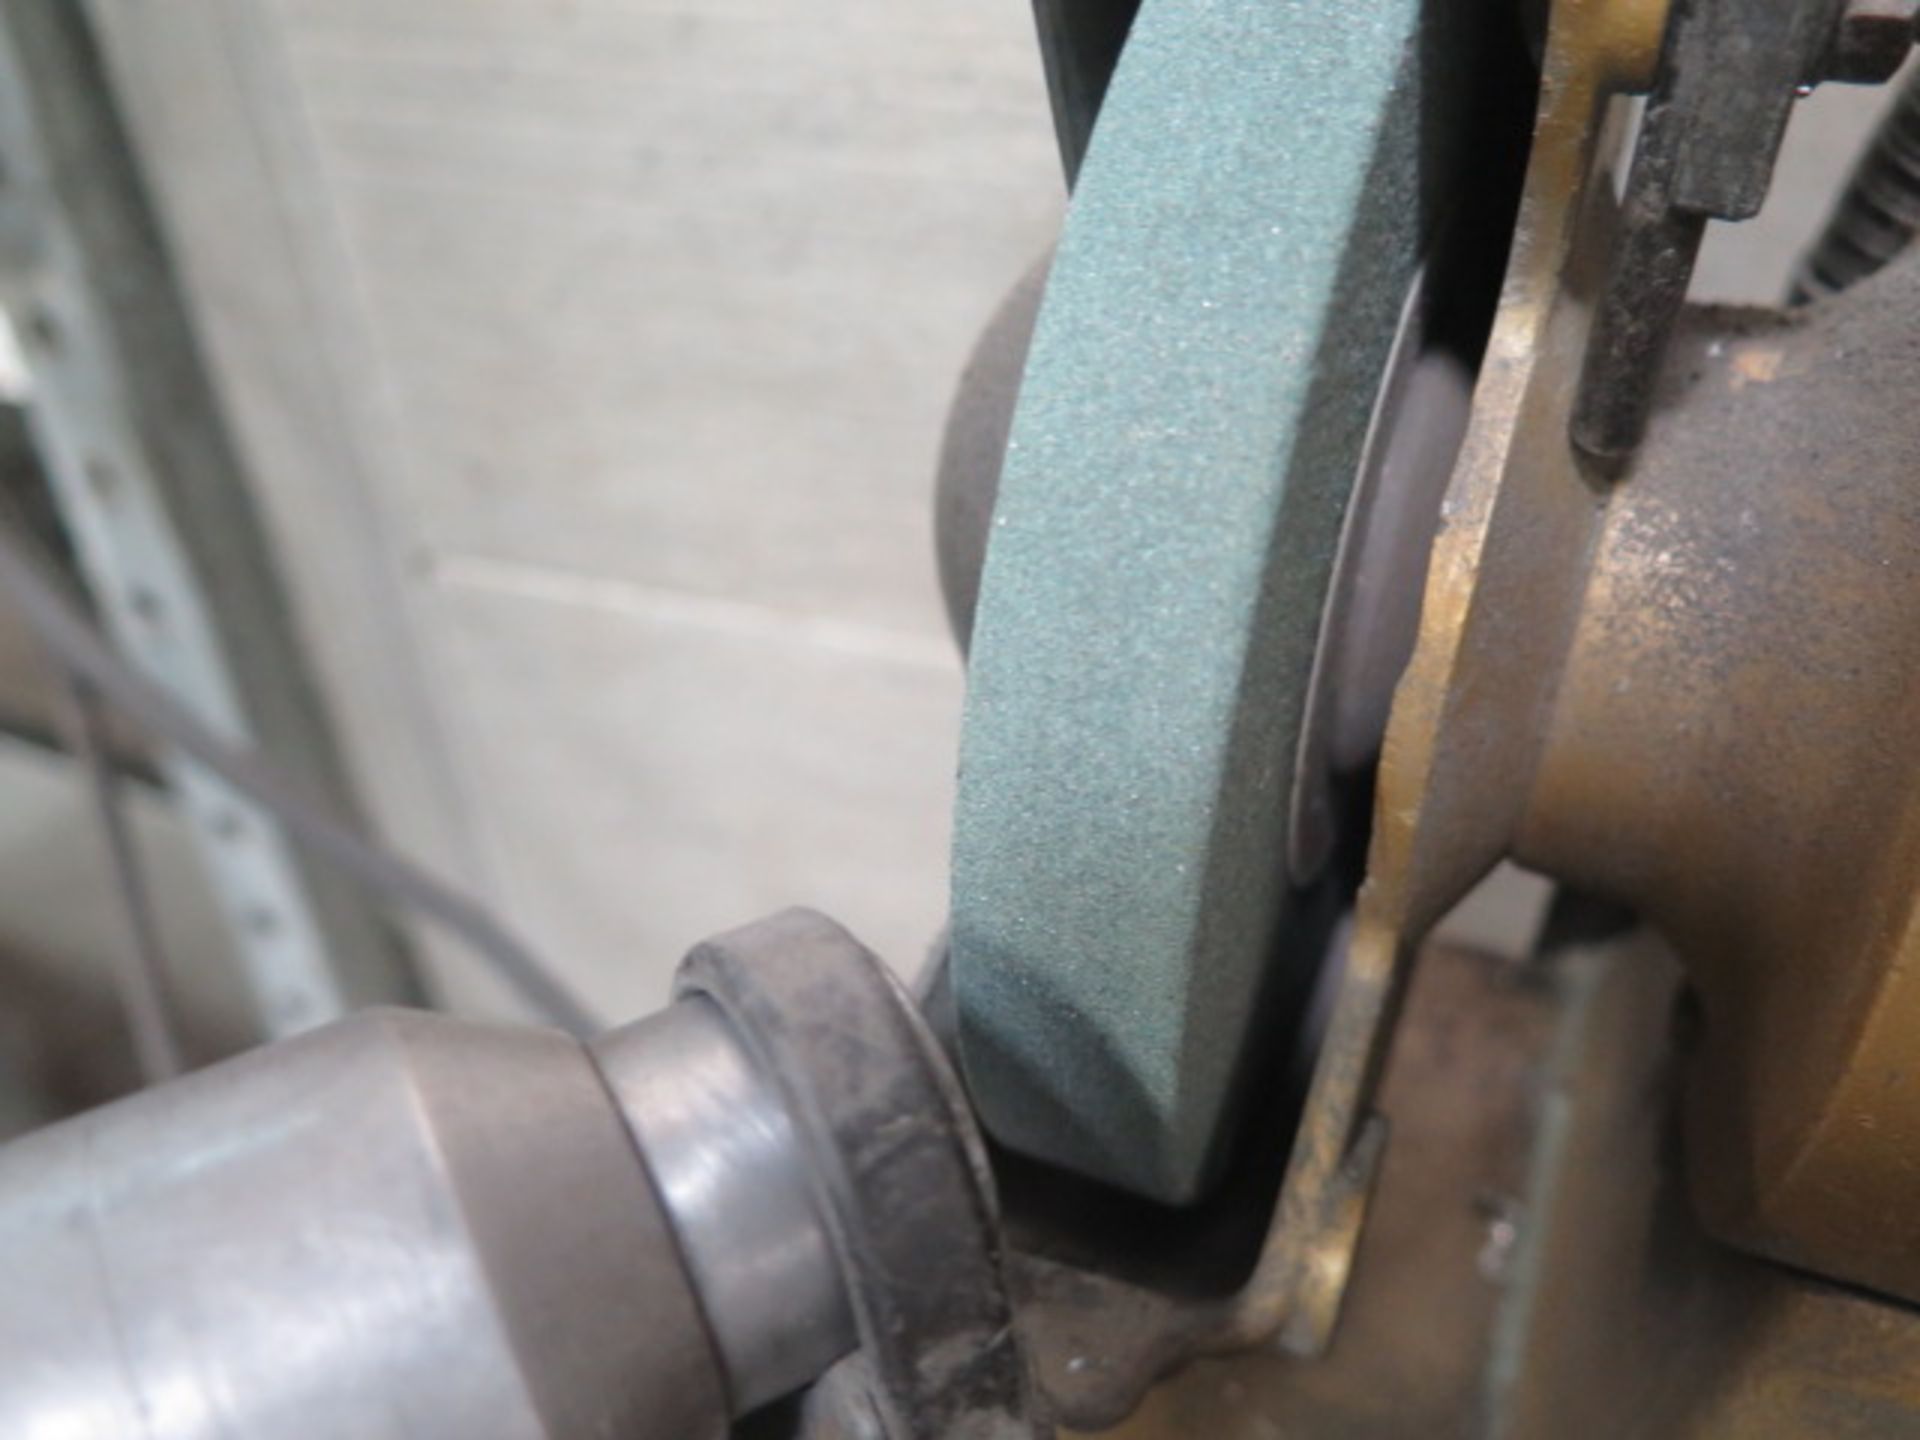 Darex Pedestal Drill Sharpener. This Item is Sold AS IS and with NO Warranty Applied. - Image 5 of 7